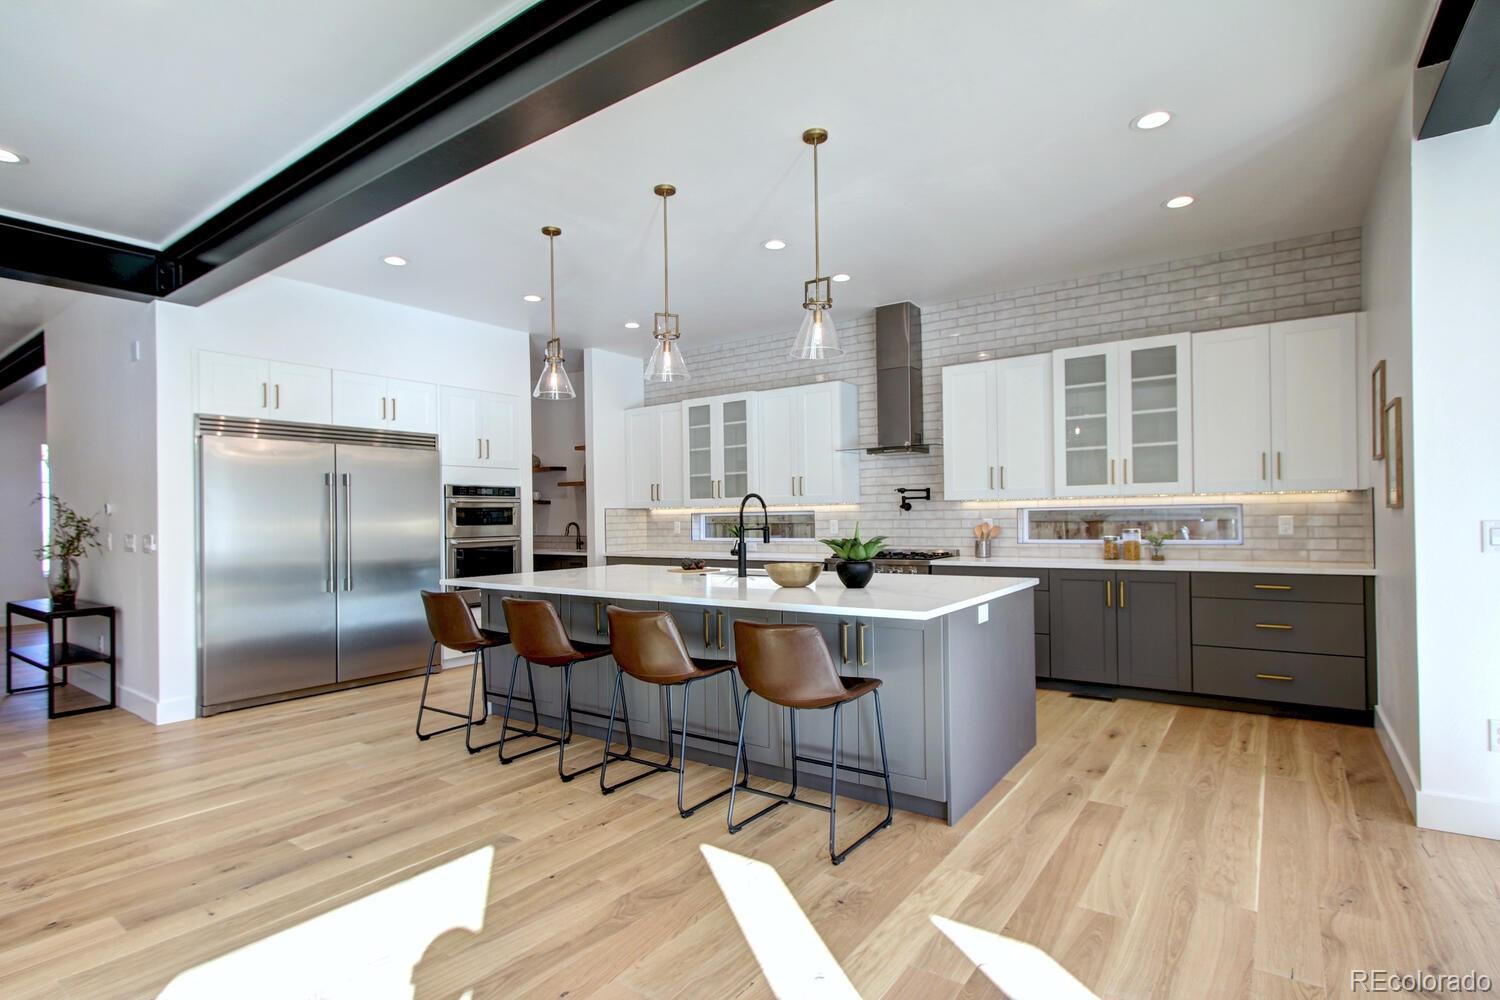 a large kitchen with kitchen island a large counter space wooden floor stainless steel appliances and windows